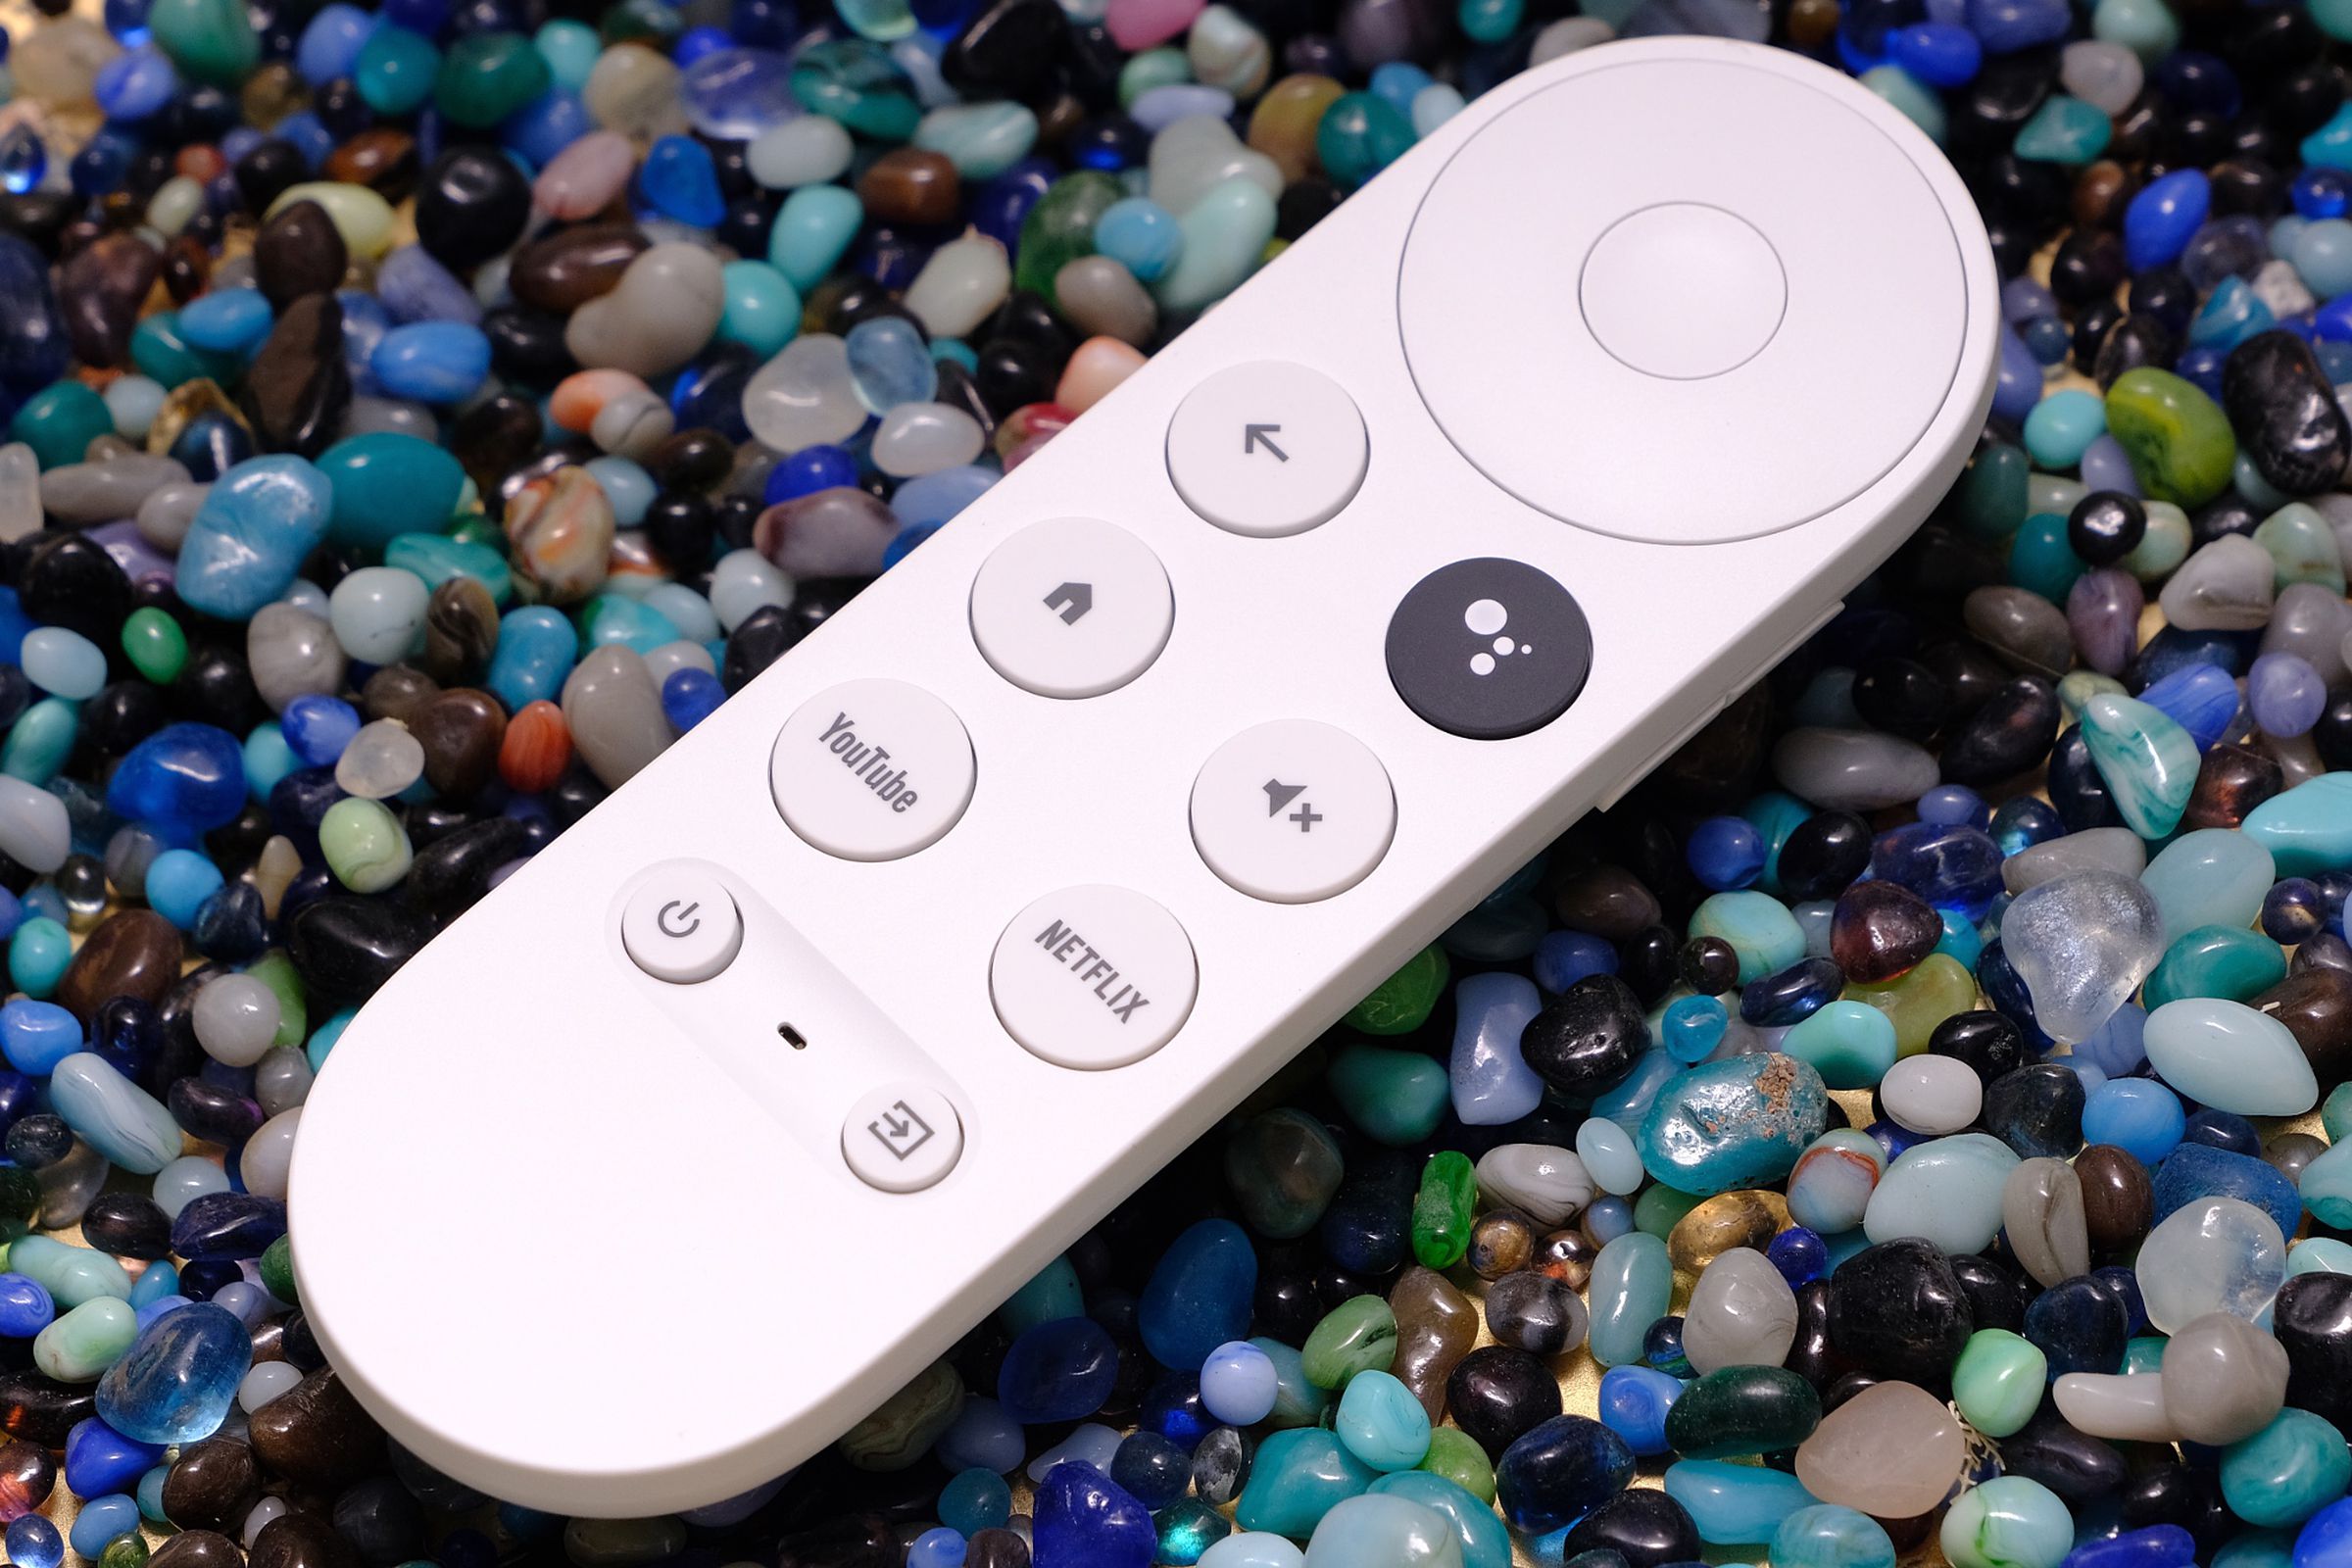 An image of the Chromecast with Google TV remote on top of various colored stones.